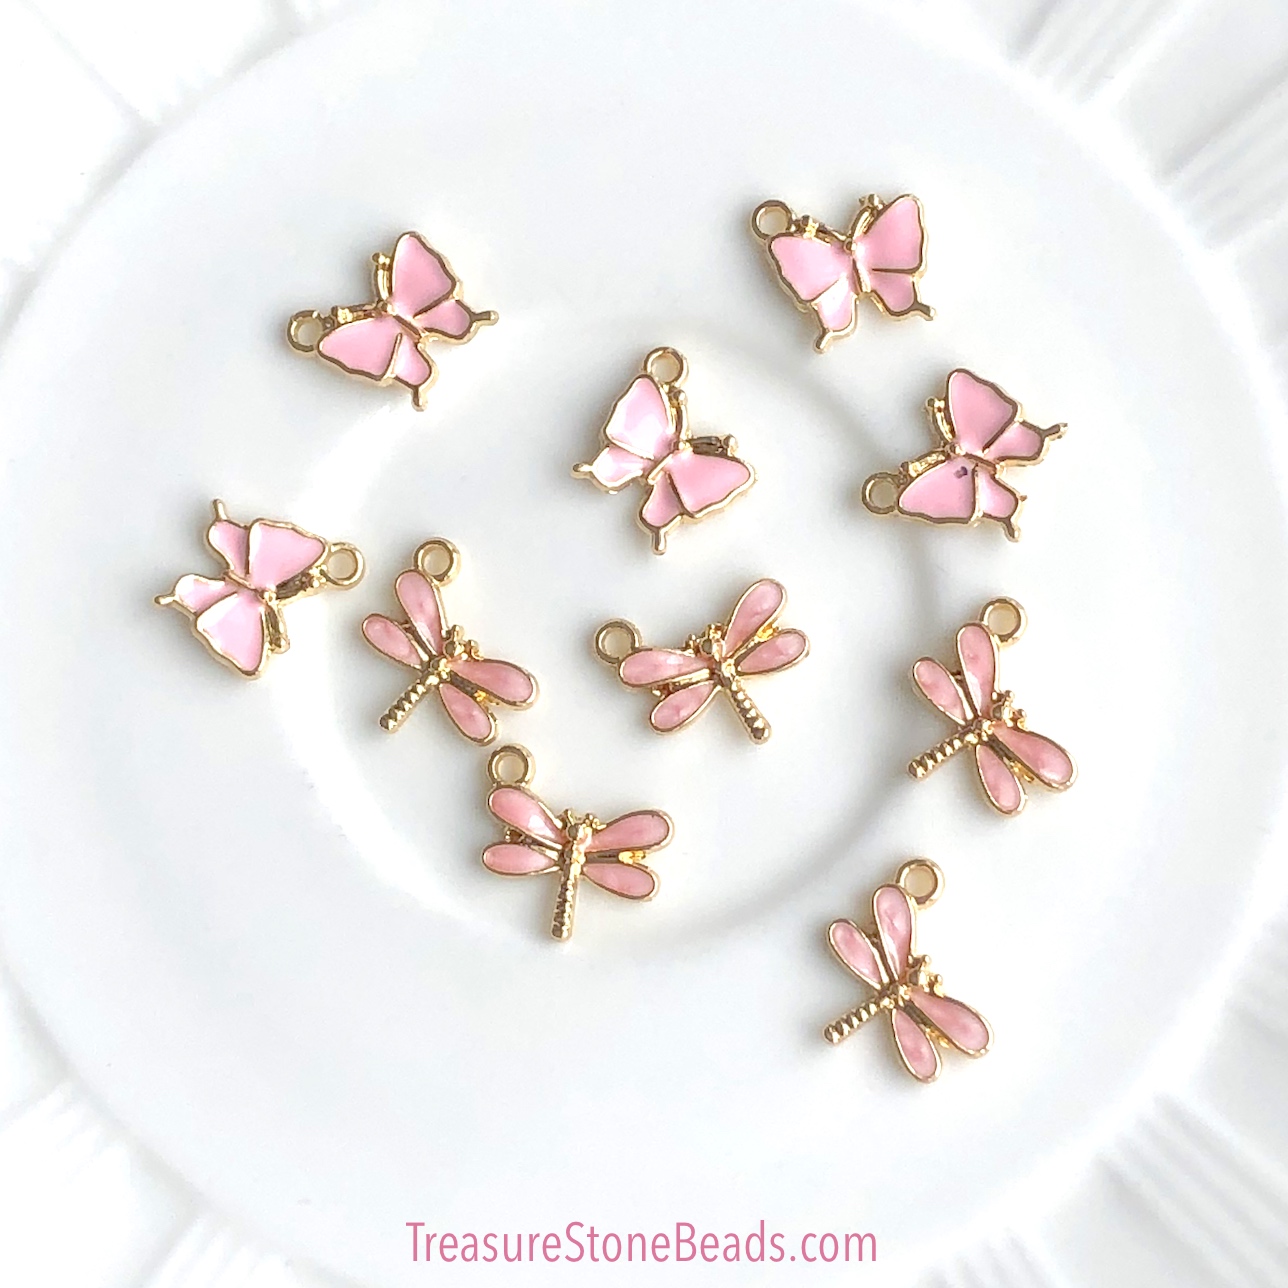 Charm / Pendant, 15x12mm pink dragonfly, gold, Enamel. pack of 3